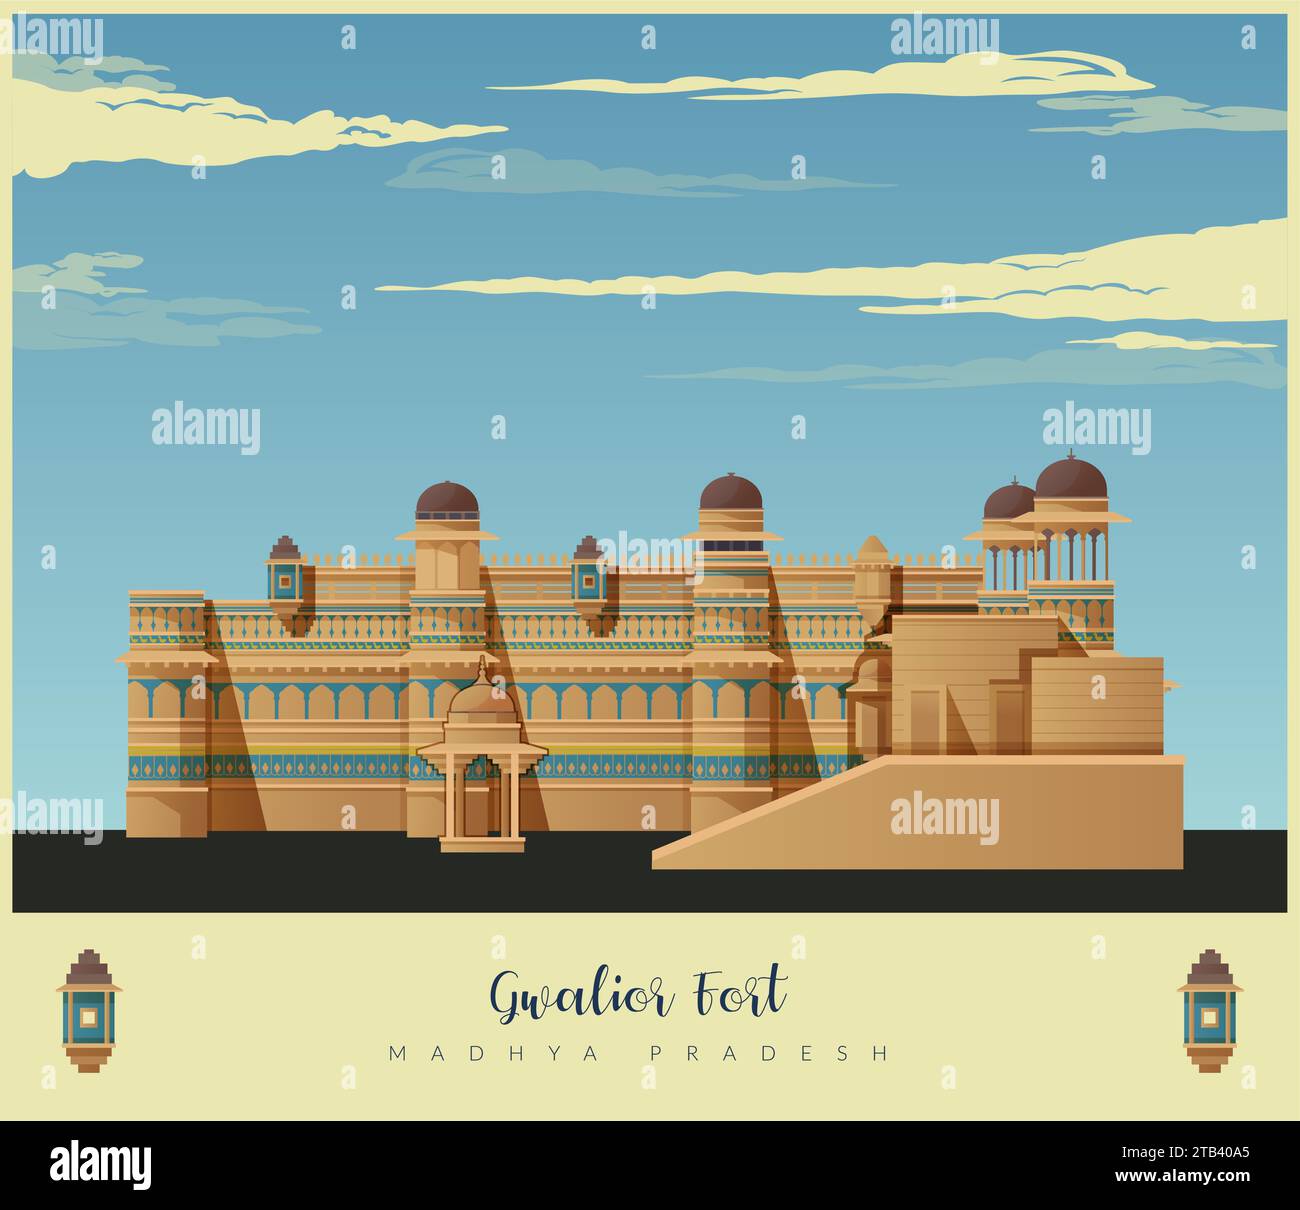 Fort gwalior Stock Vector Images - Alamy